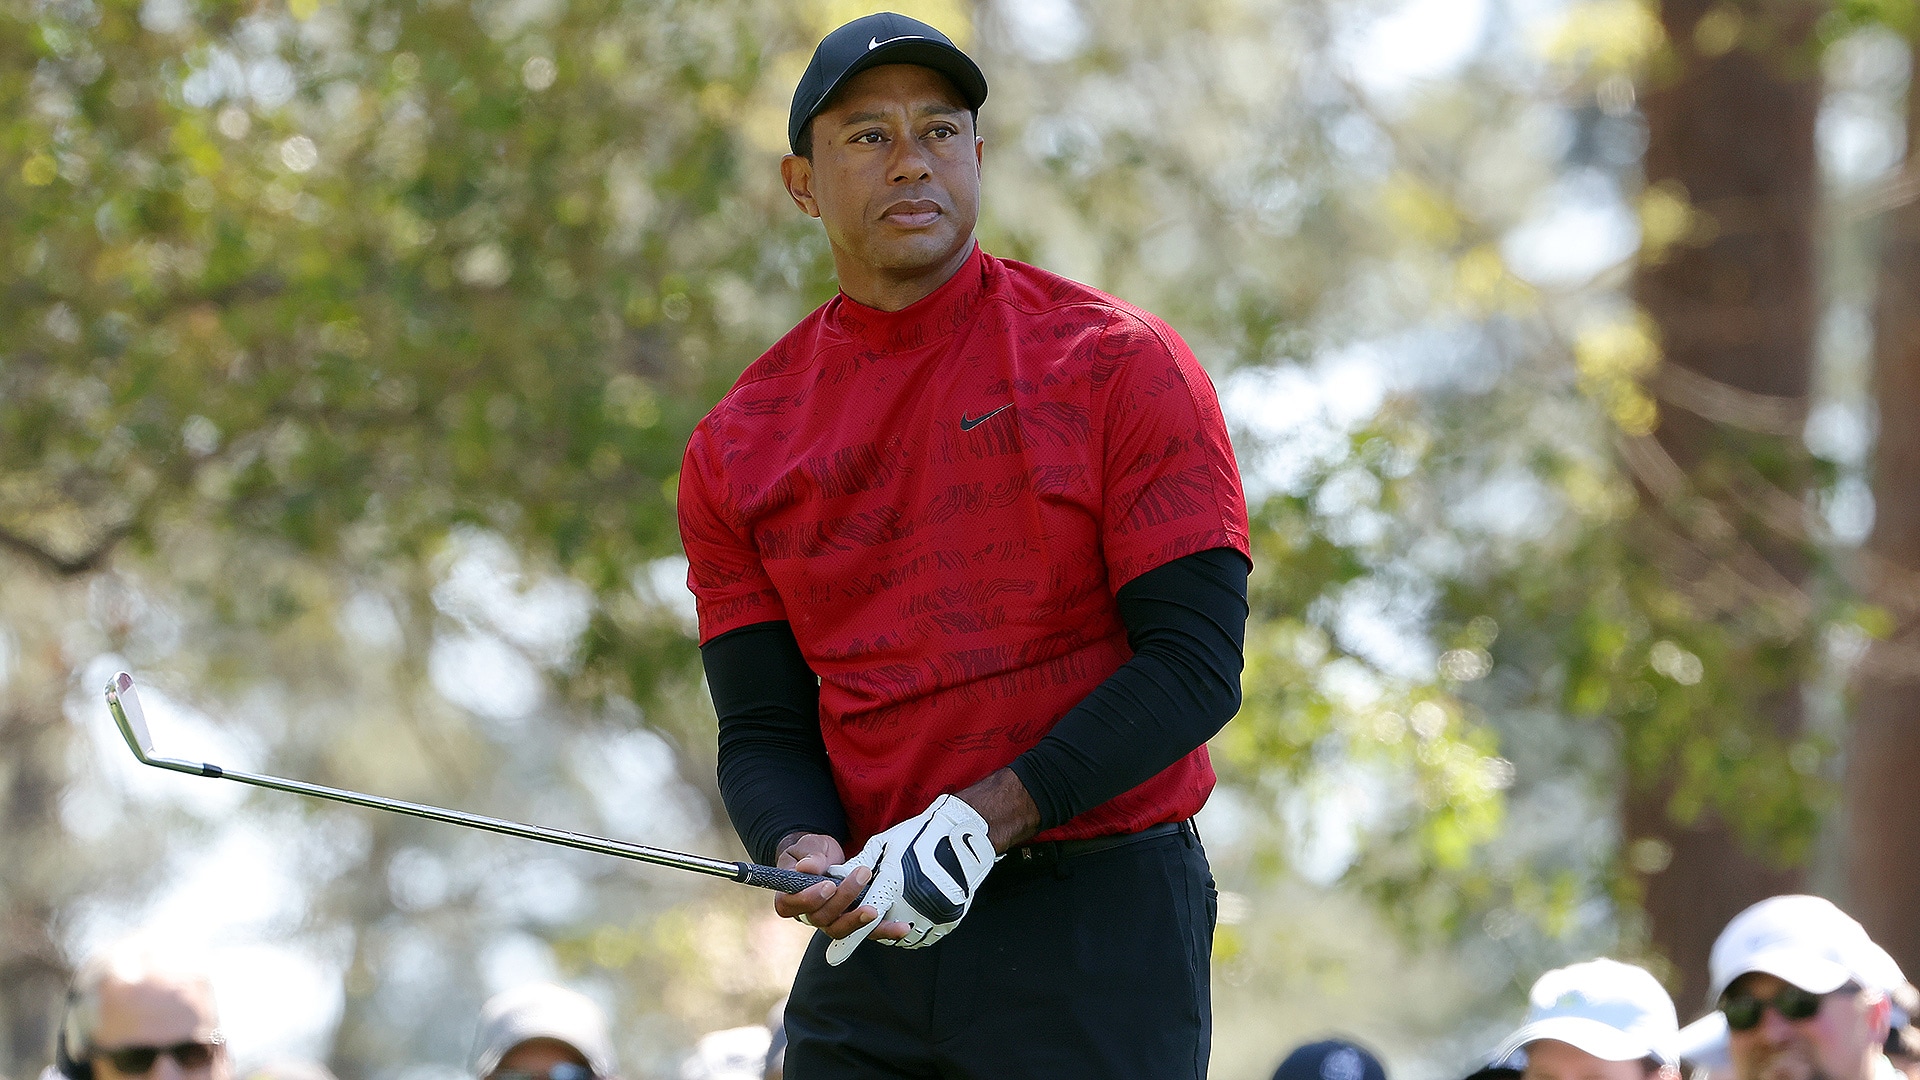 2022 Masters: Tiger Woods says he’s playing The Open at St. Andrews, but unsure about PGA